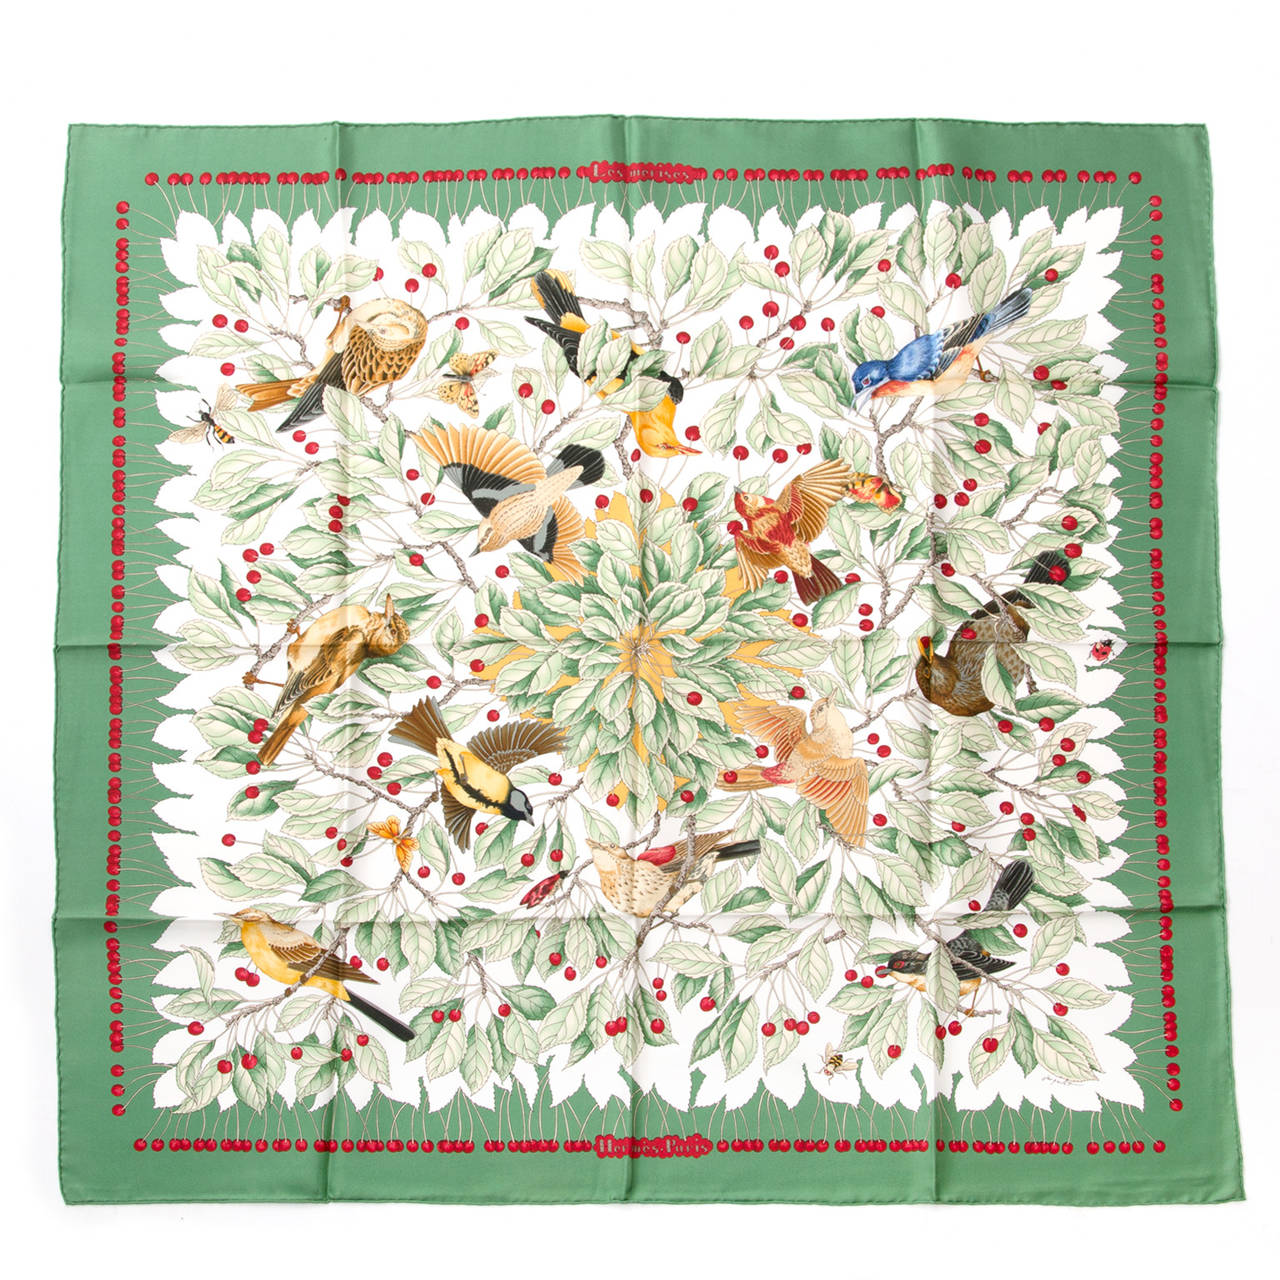 Hermès 'Les merises' carré scarf

This Hermès scarf is called 'les merises' and has a beautiful tropical print with birds and leaves.

Made out of 100% silk.